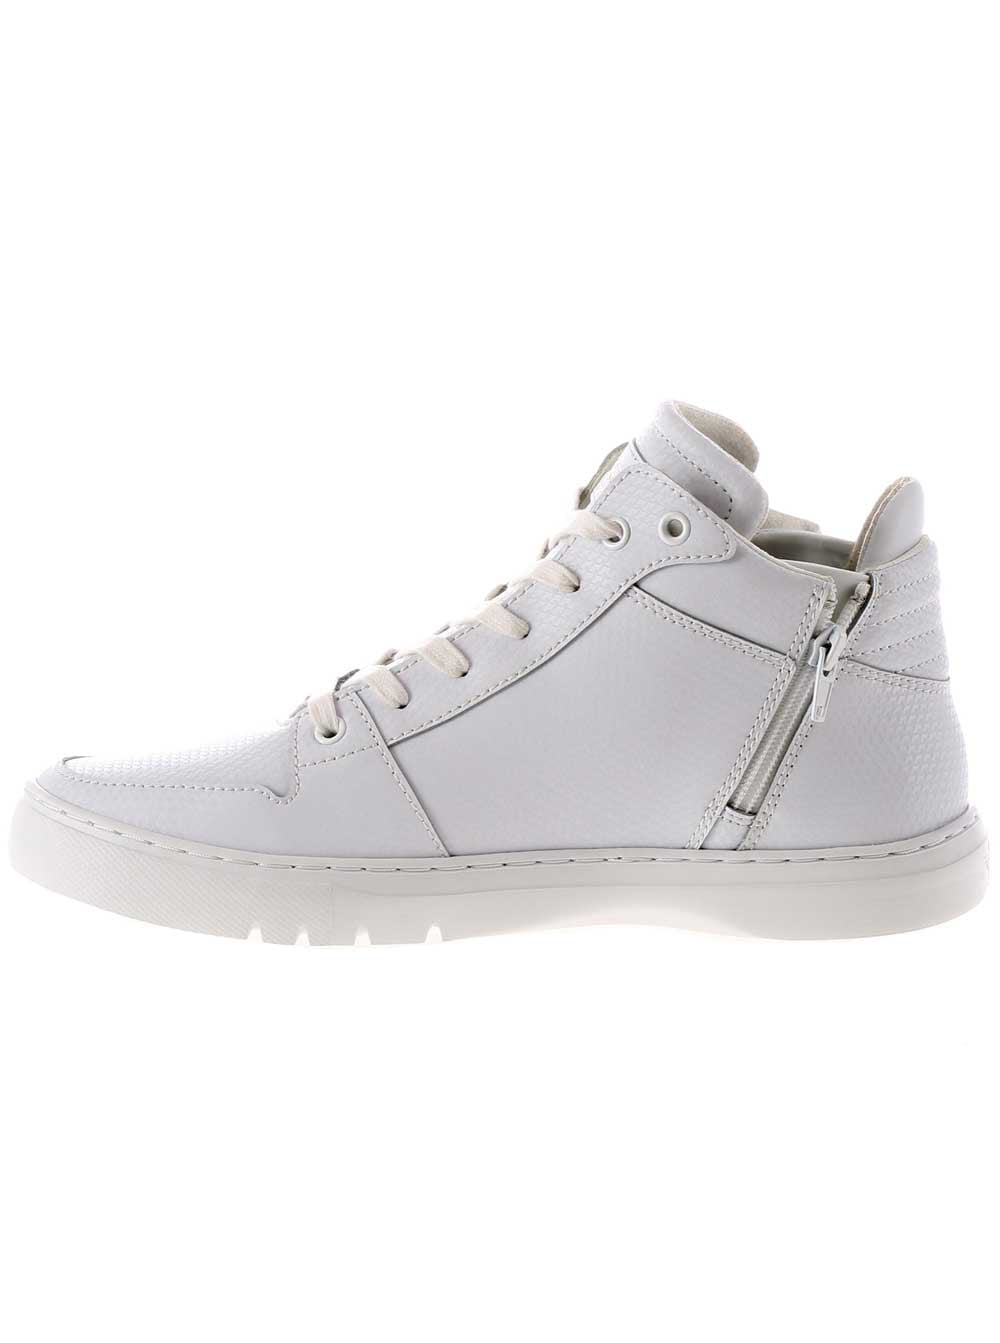 Creative Recreation Adonis Mid Mens White Leather Zipper High Top Sneakers Shoes 